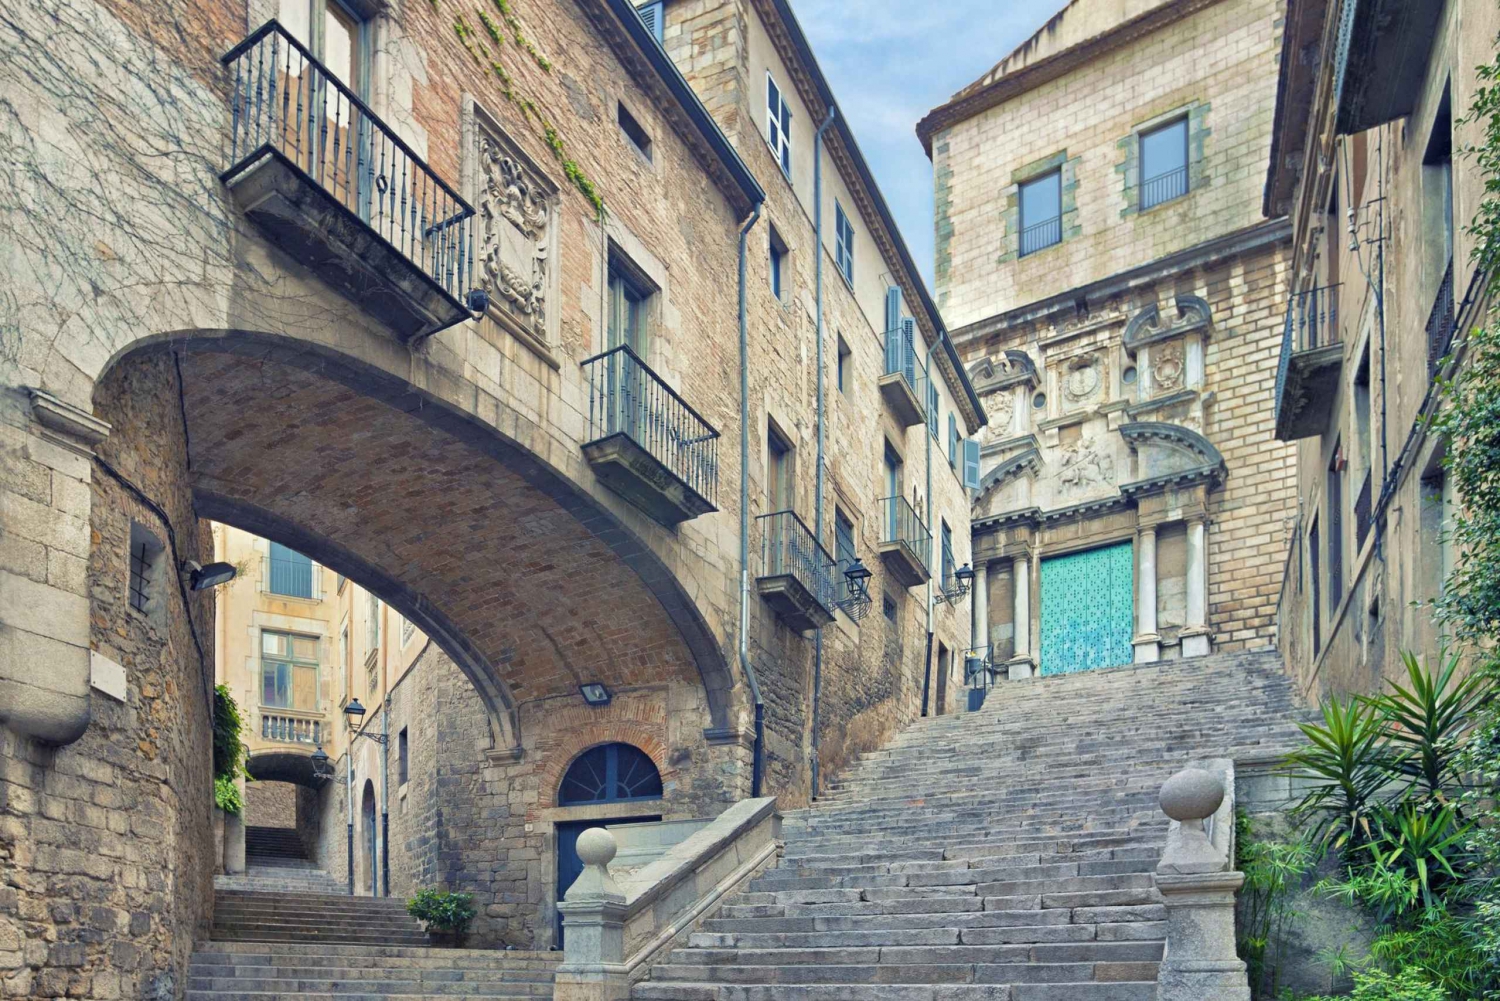 From Barcelona: Medieval Girona Tour